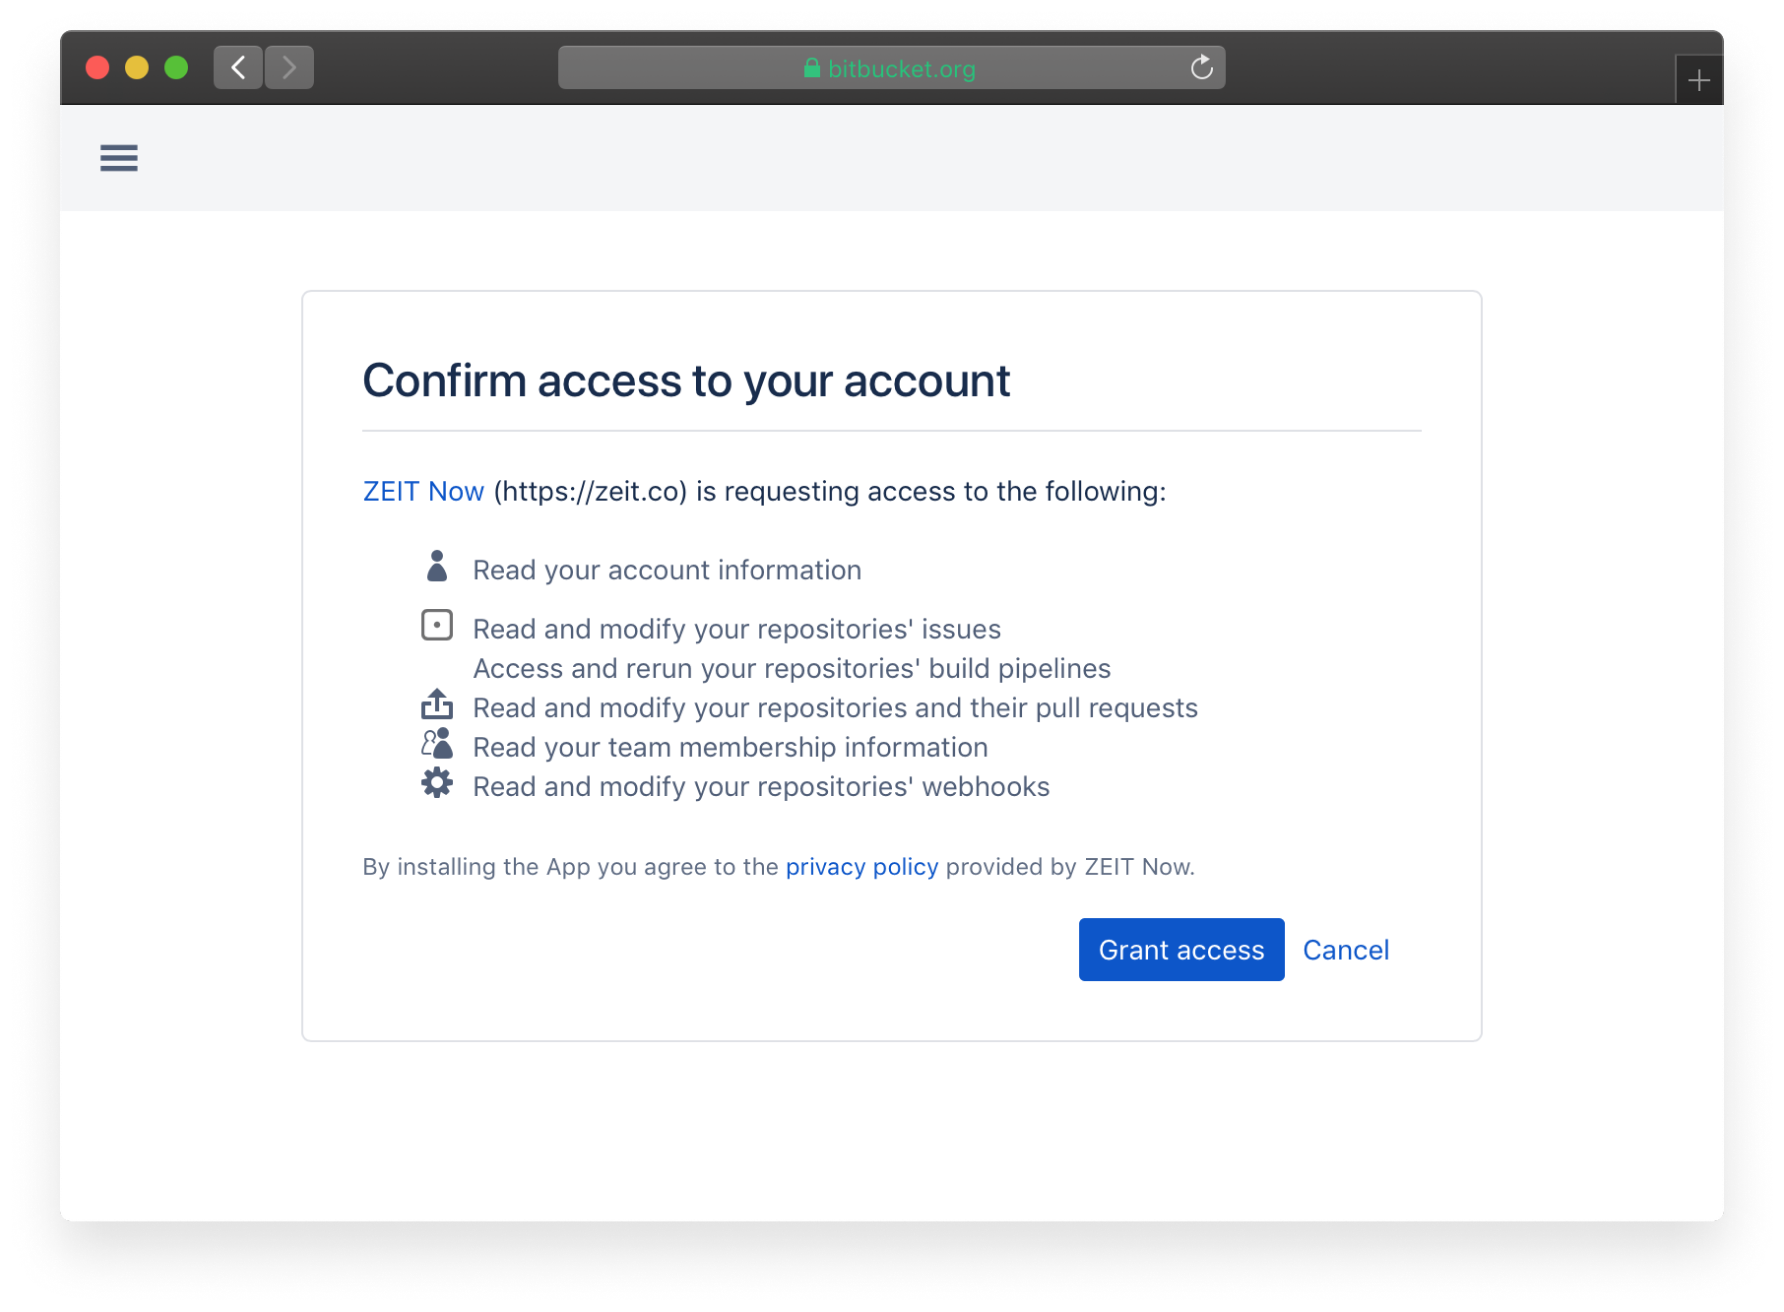 Click "Grant Access" to complete the Bitbucket connection process